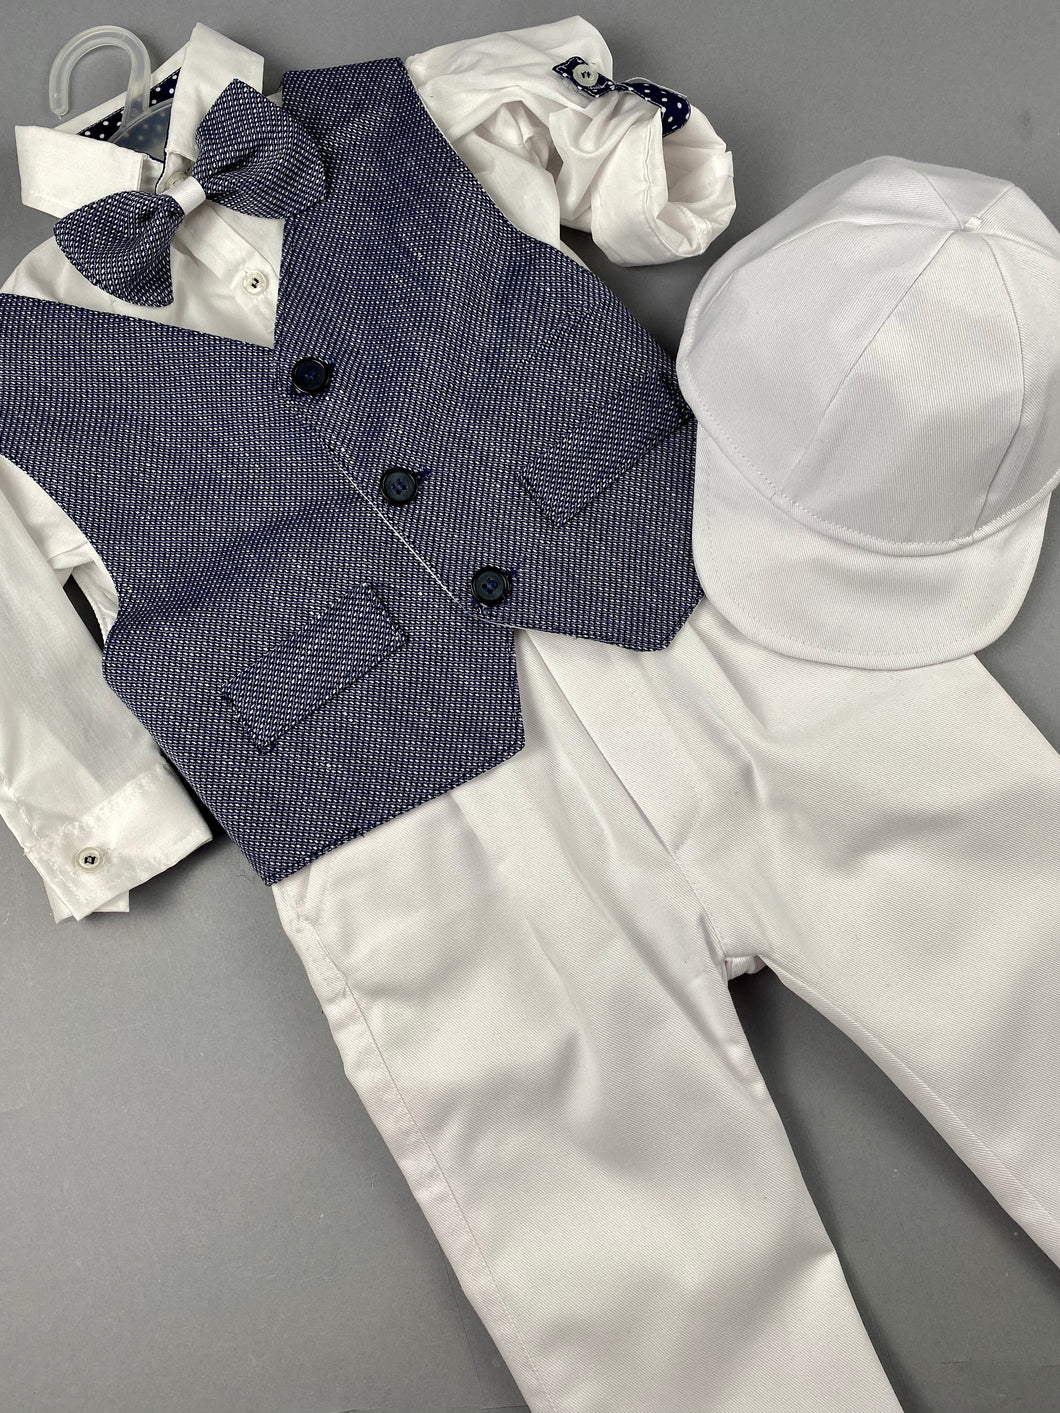 Rosies Collections 7pc full suit, Trimmed Dress shirt, Cuff sleeves, Pants, Jacket, Vest, Belt or Suspenders, Cap. Made in Greece exclusively for Rosies Collections S201924